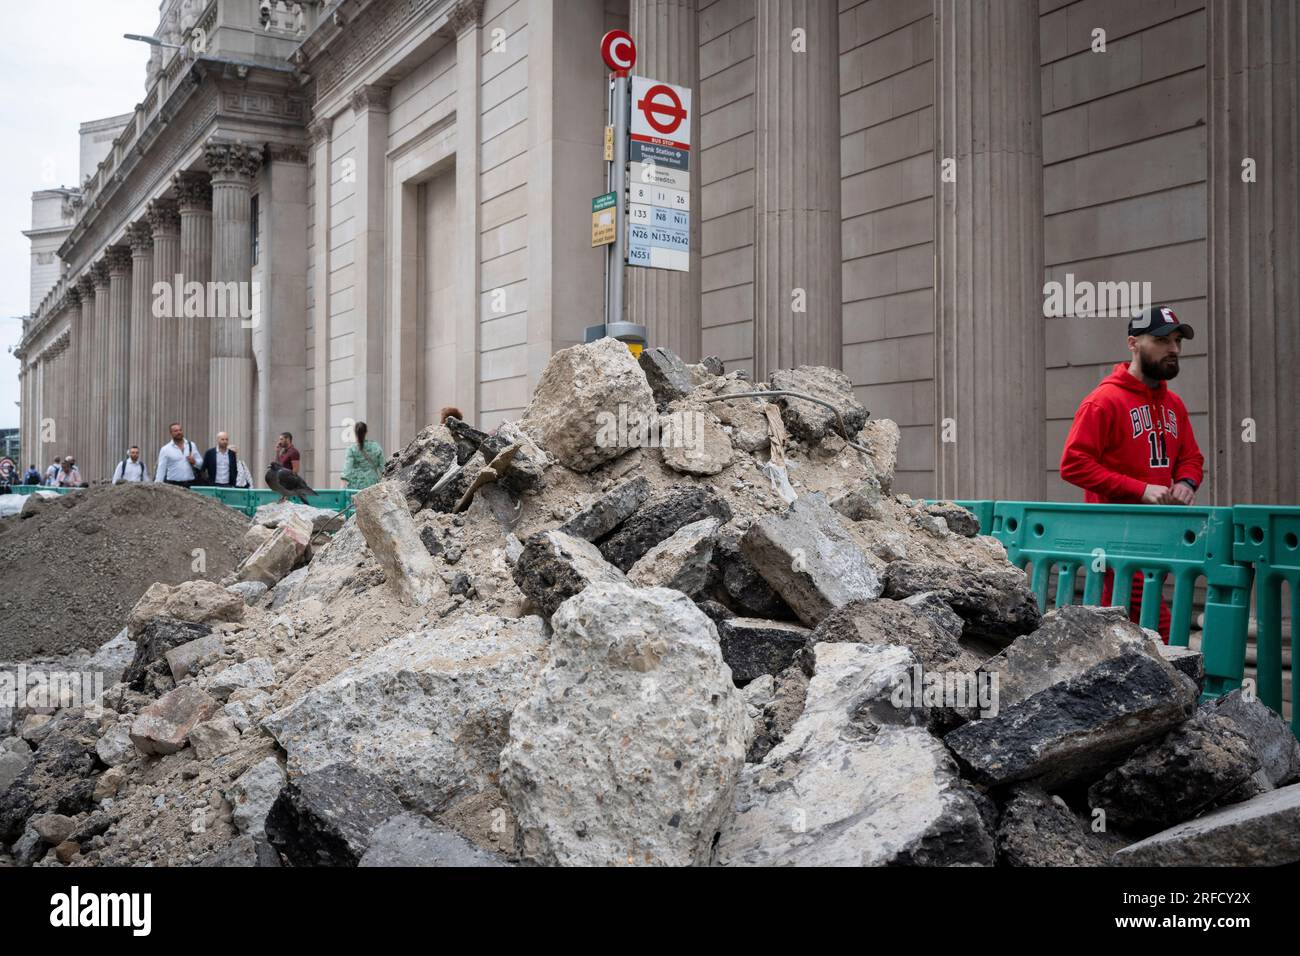 A heap of concrete rubble is piled up beneath the tall pillars and columns of the Bank of England's architecture on Threadneedle Street in the City of London, the capital's financial district, on 26th July 2023, in London, England. Stock Photo